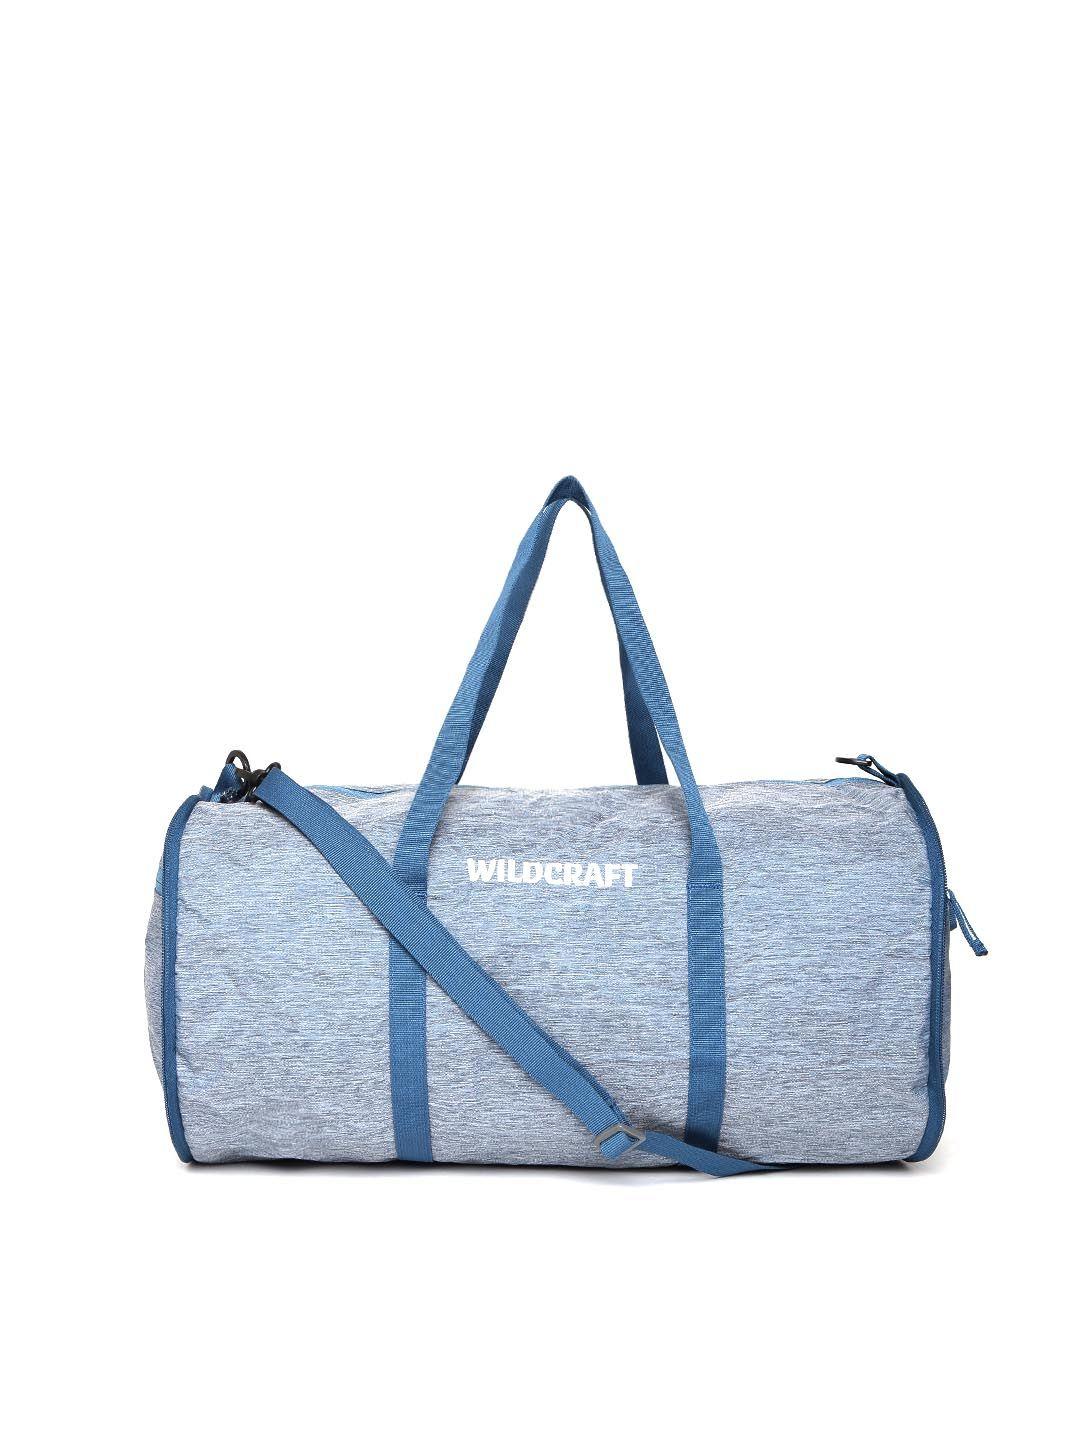 wildcraft unisex blue frisbee new foldable duffel bag with shoulder strap